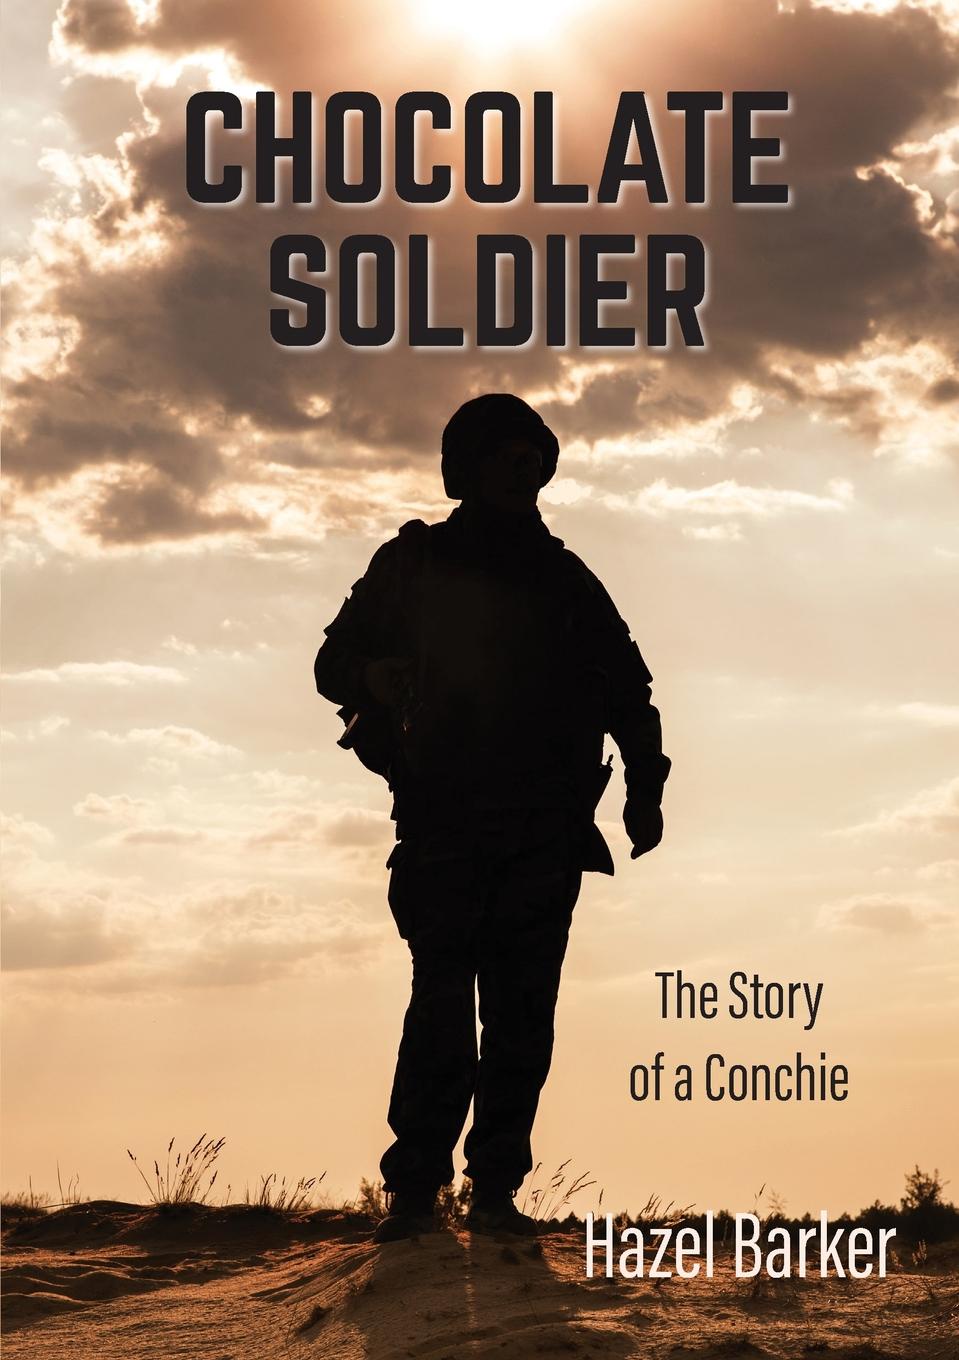 Chocolate Soldier. The Story of a Conchie